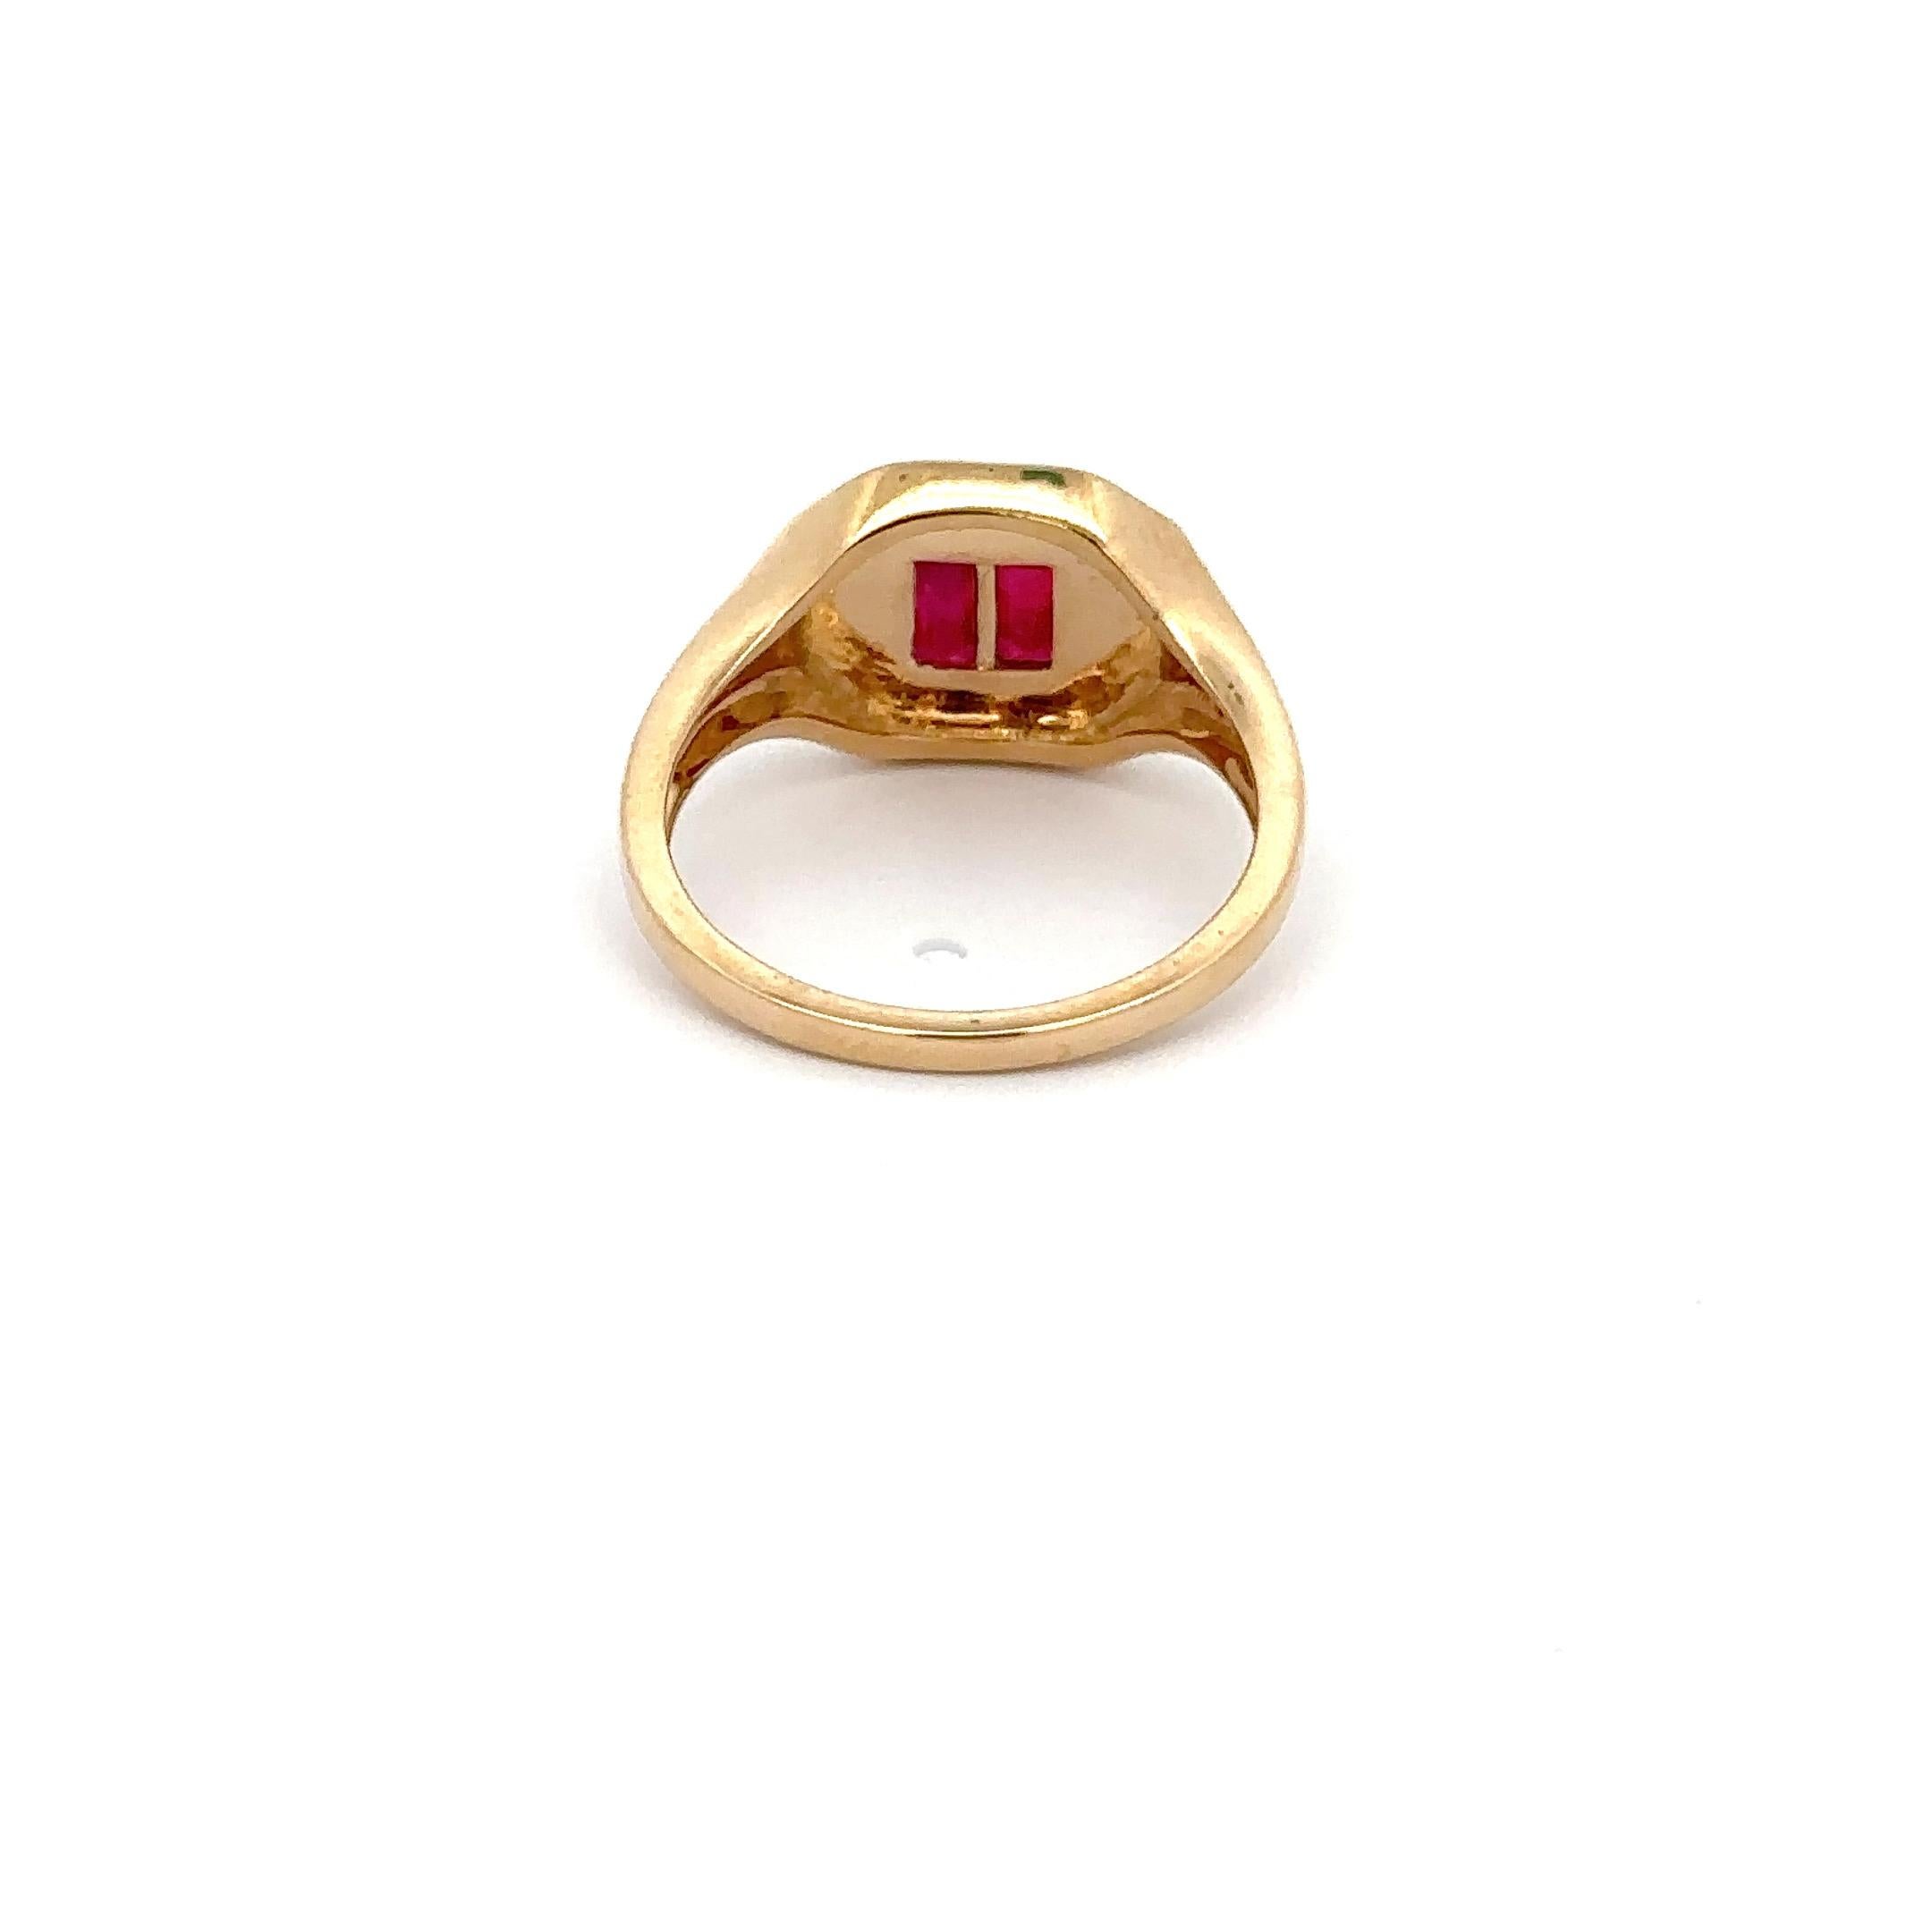 For Sale:  Baguette Cut Ruby Gemstone Unisex Signet Ring 14kt Solid Yellow Gold 5